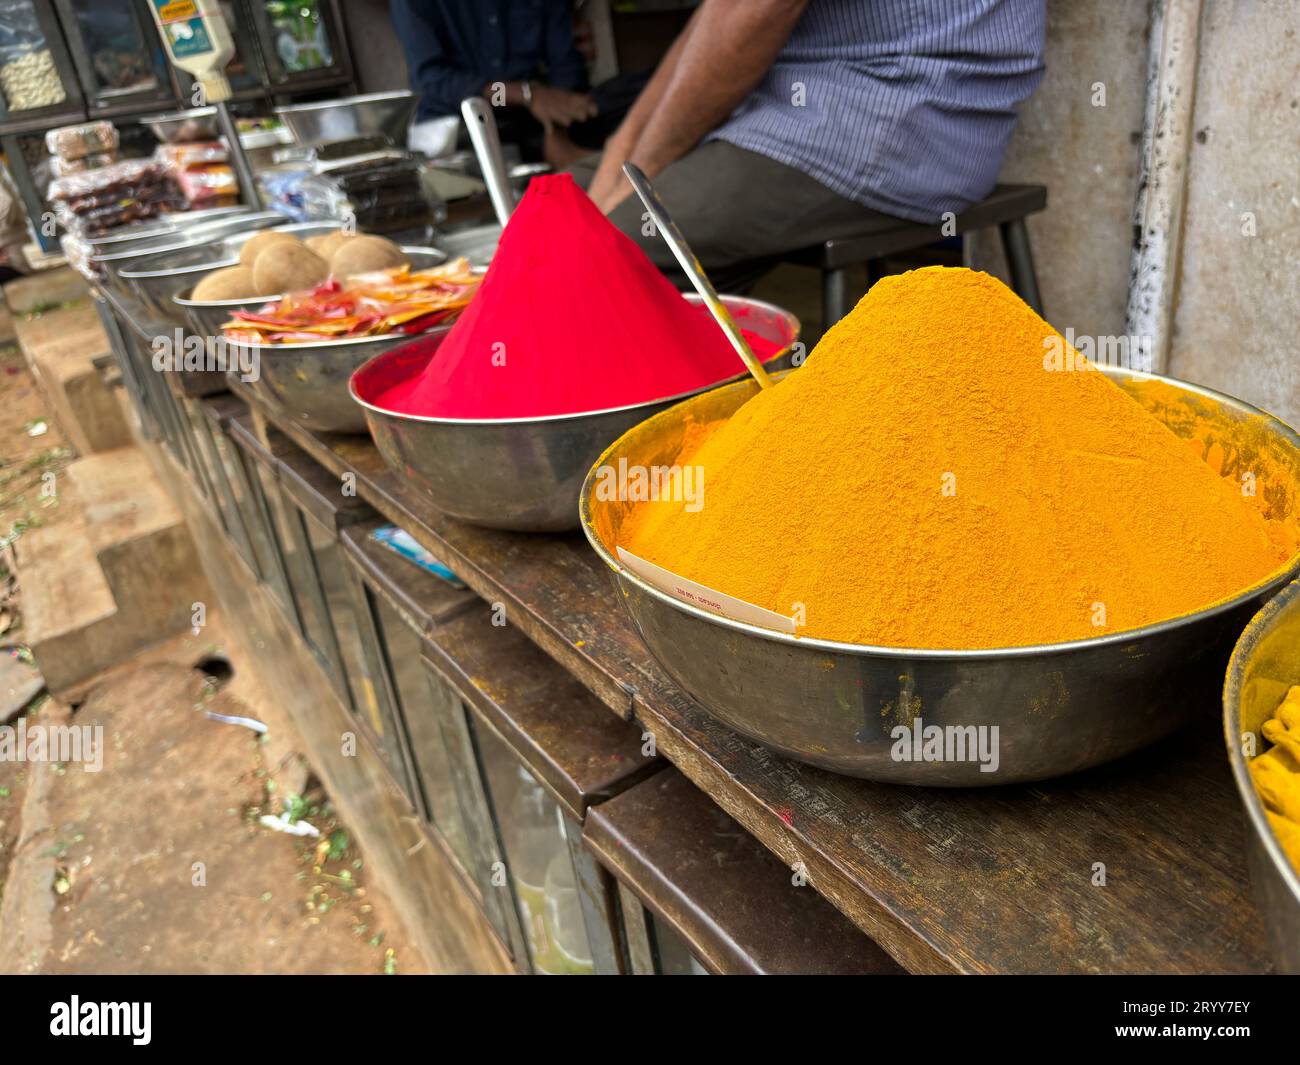 Exclusive day shots of people and flowers in KR market in Bengaluru Stock Photo